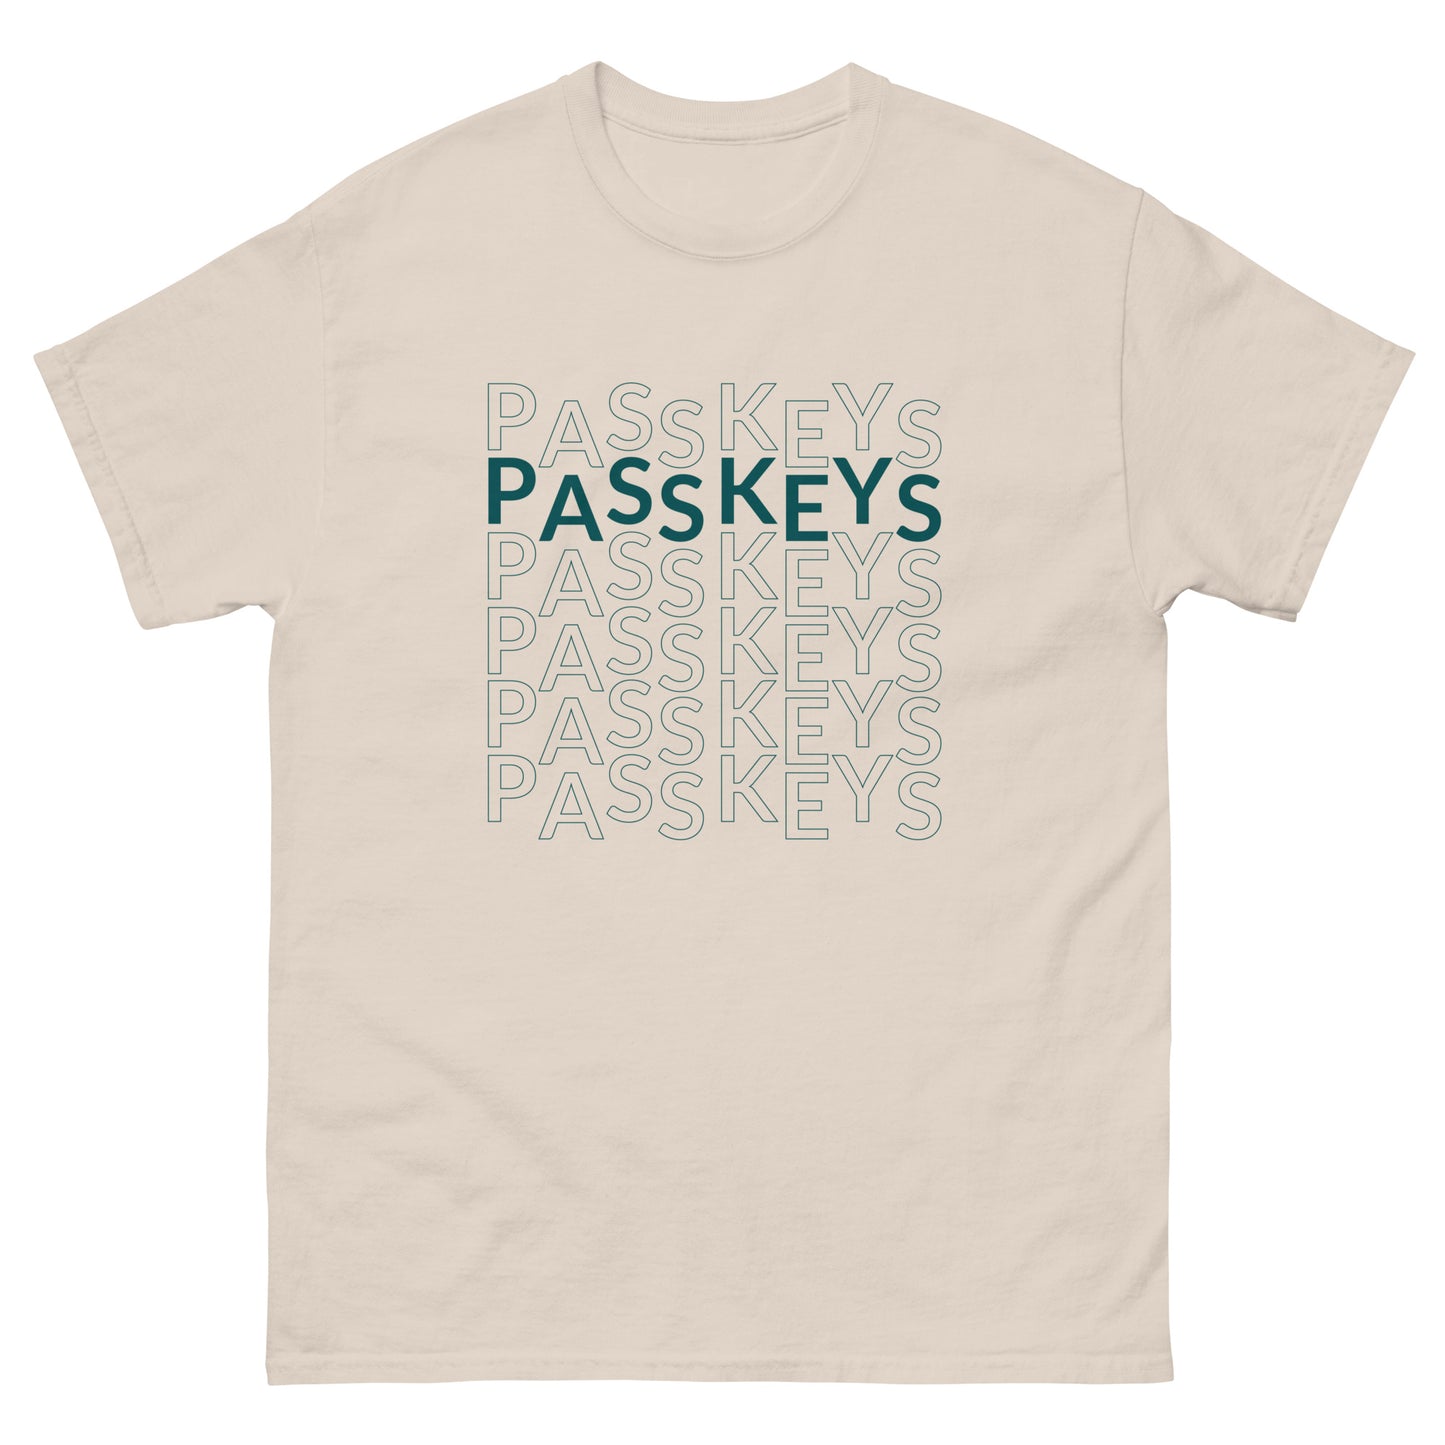 Passkeys on Repeat - Classic Fit Tee